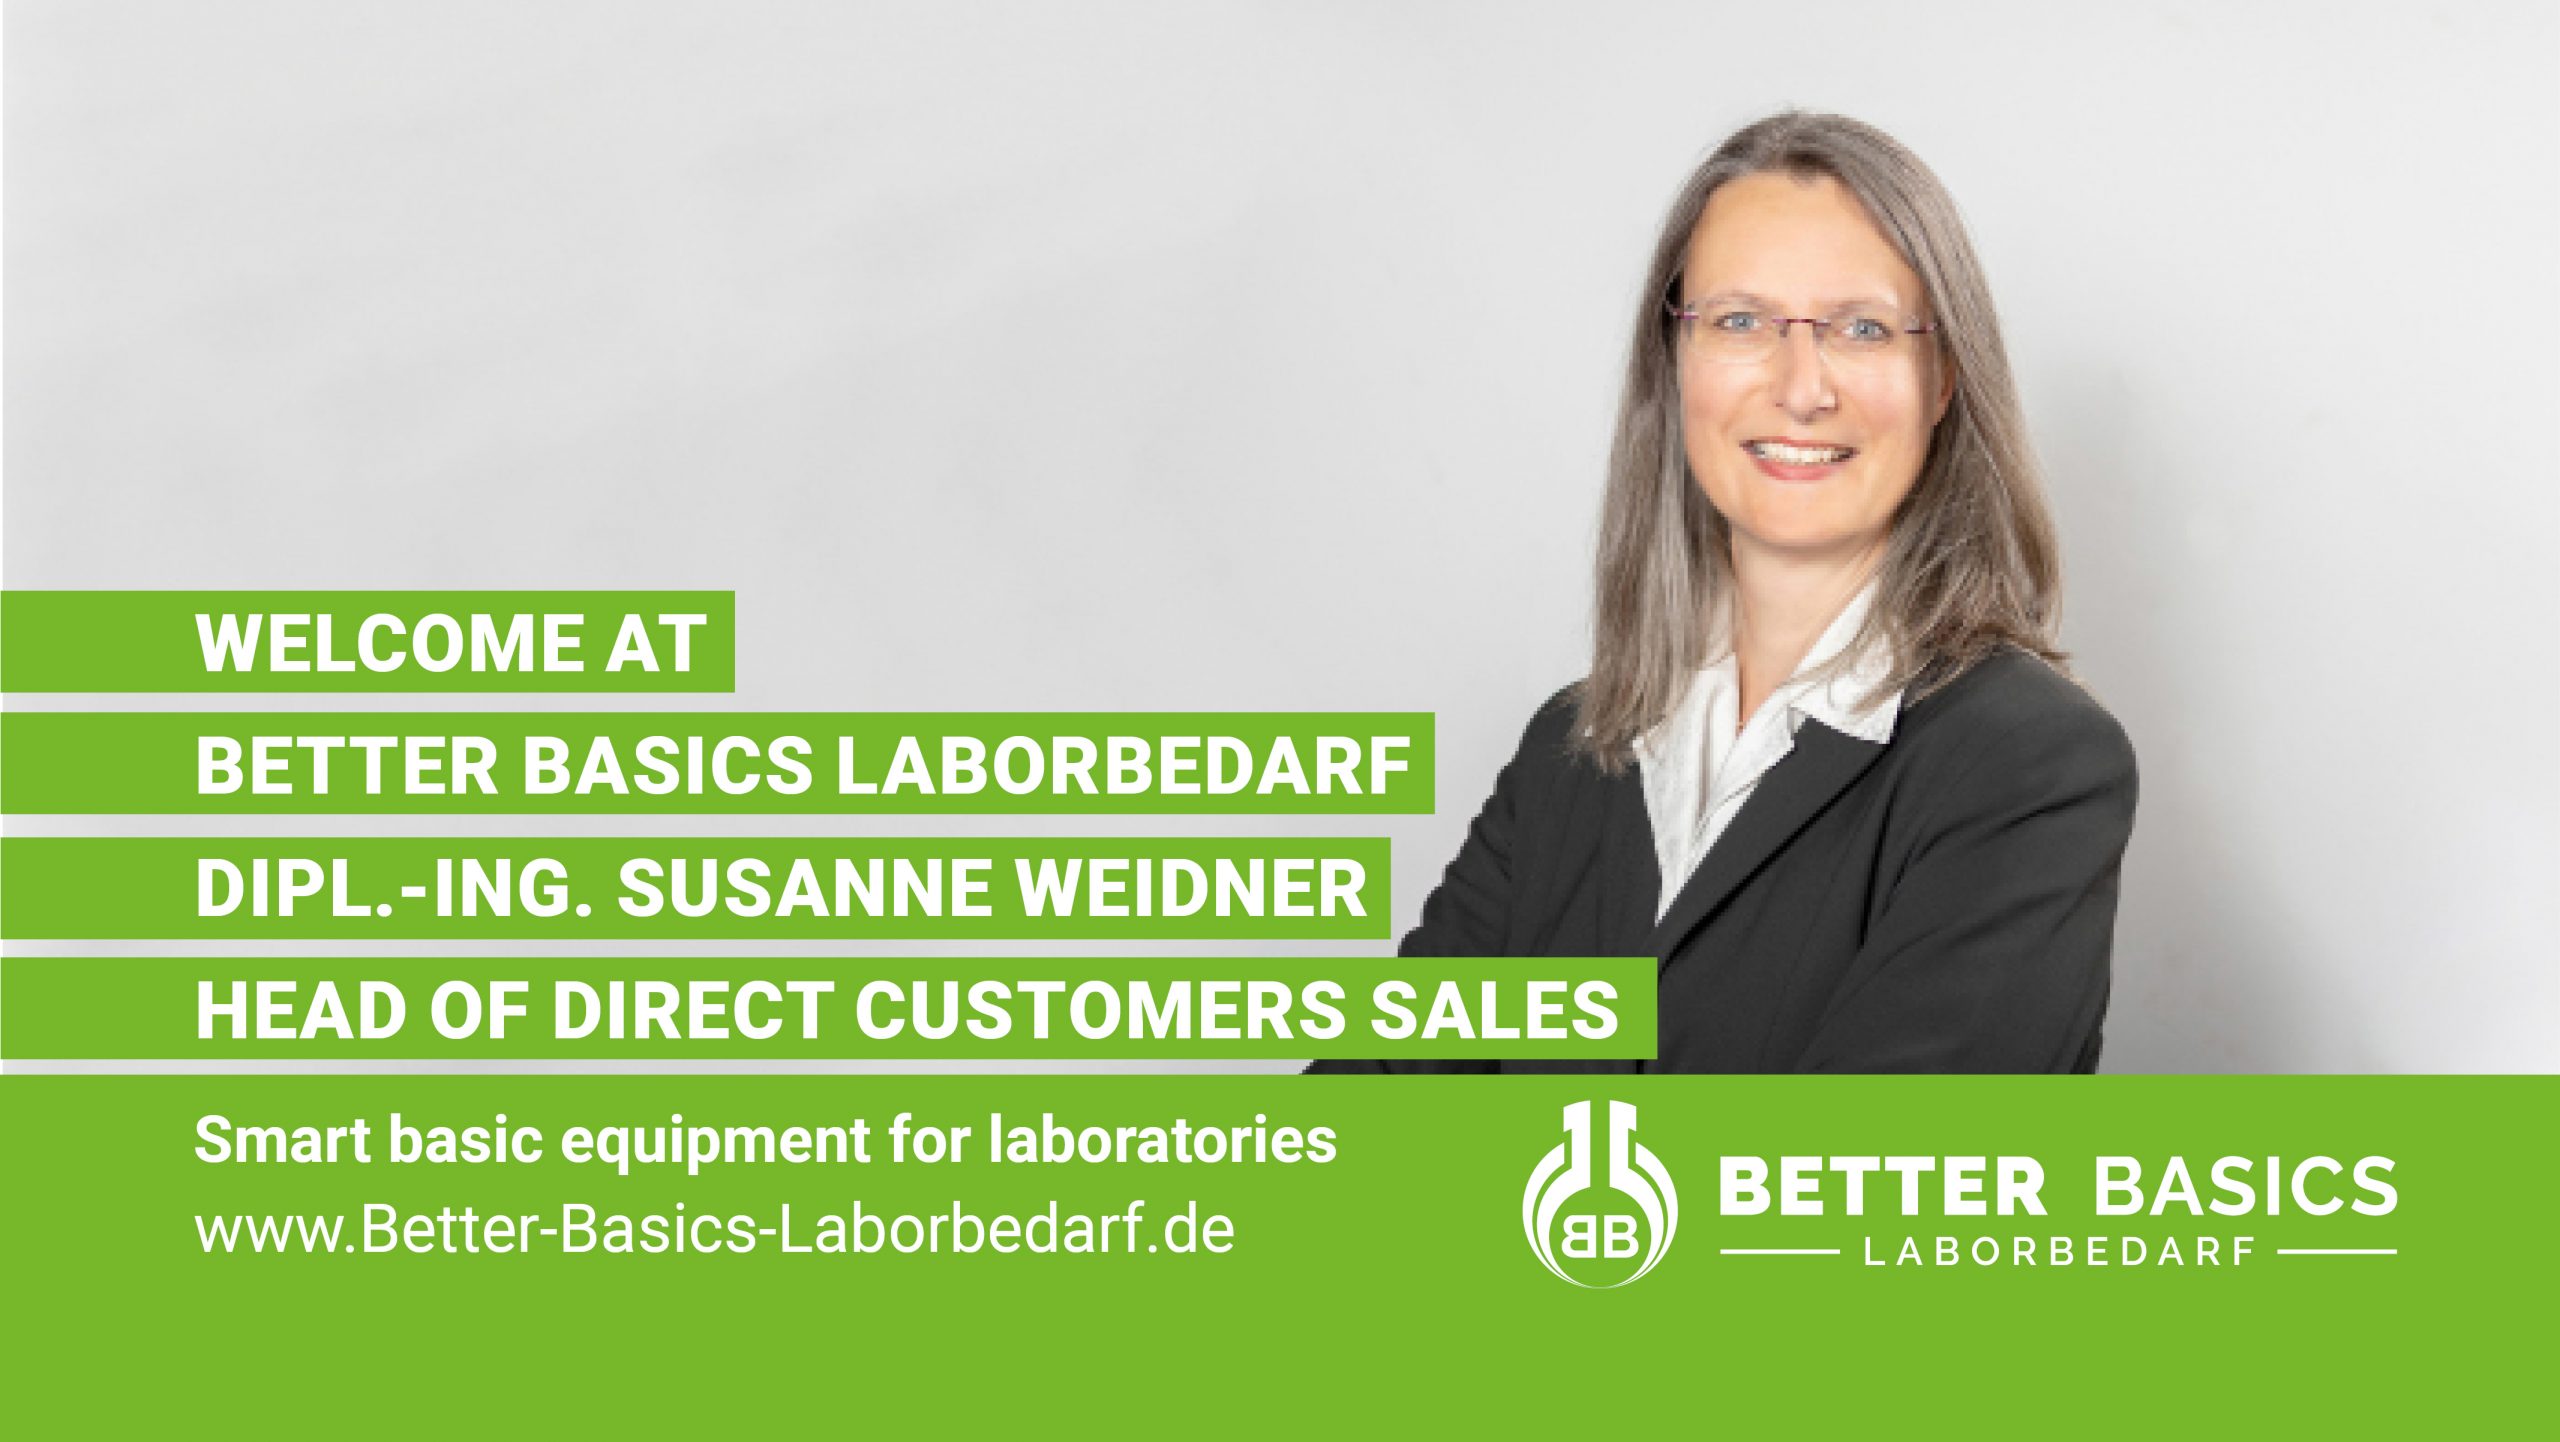 Better Basics Laborbedarf GmbH - News EN - Welcome at Better Basics Laborbedarf Dipl.- Ing. Susanne Weidner head of Direct Customers Sales